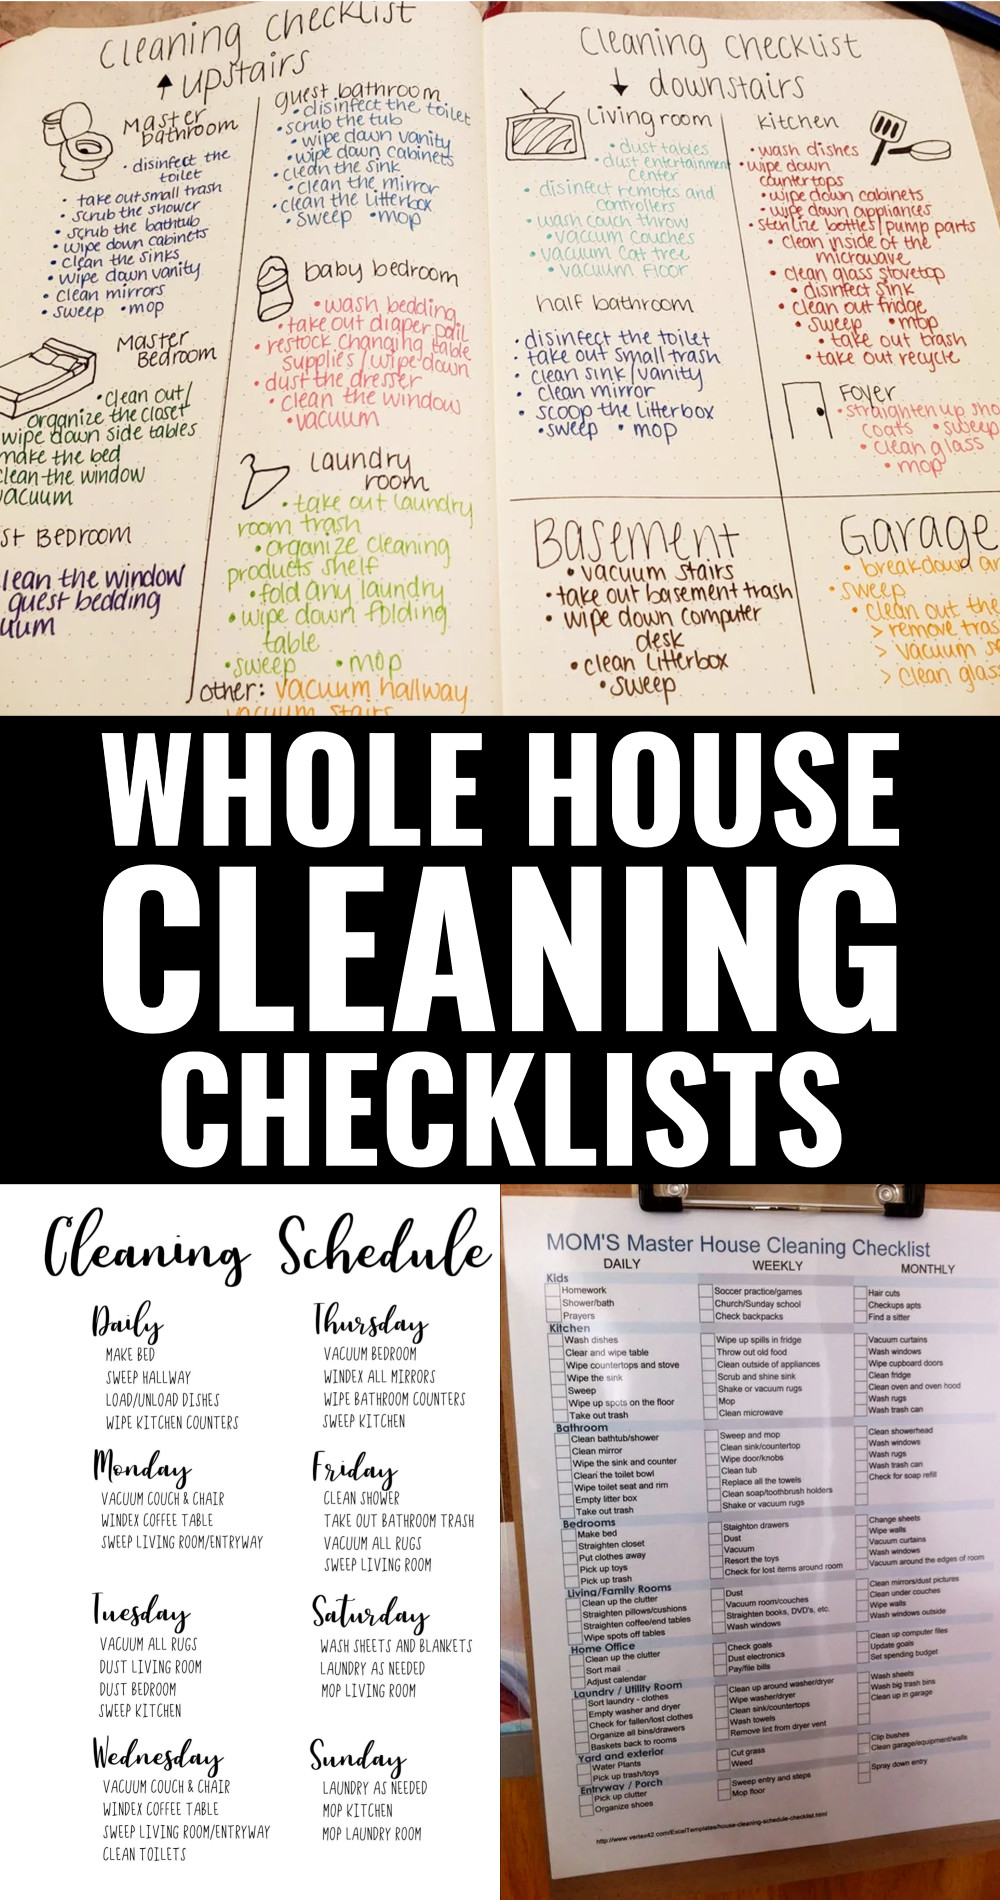 Whole House Cleaning Checklist Examples